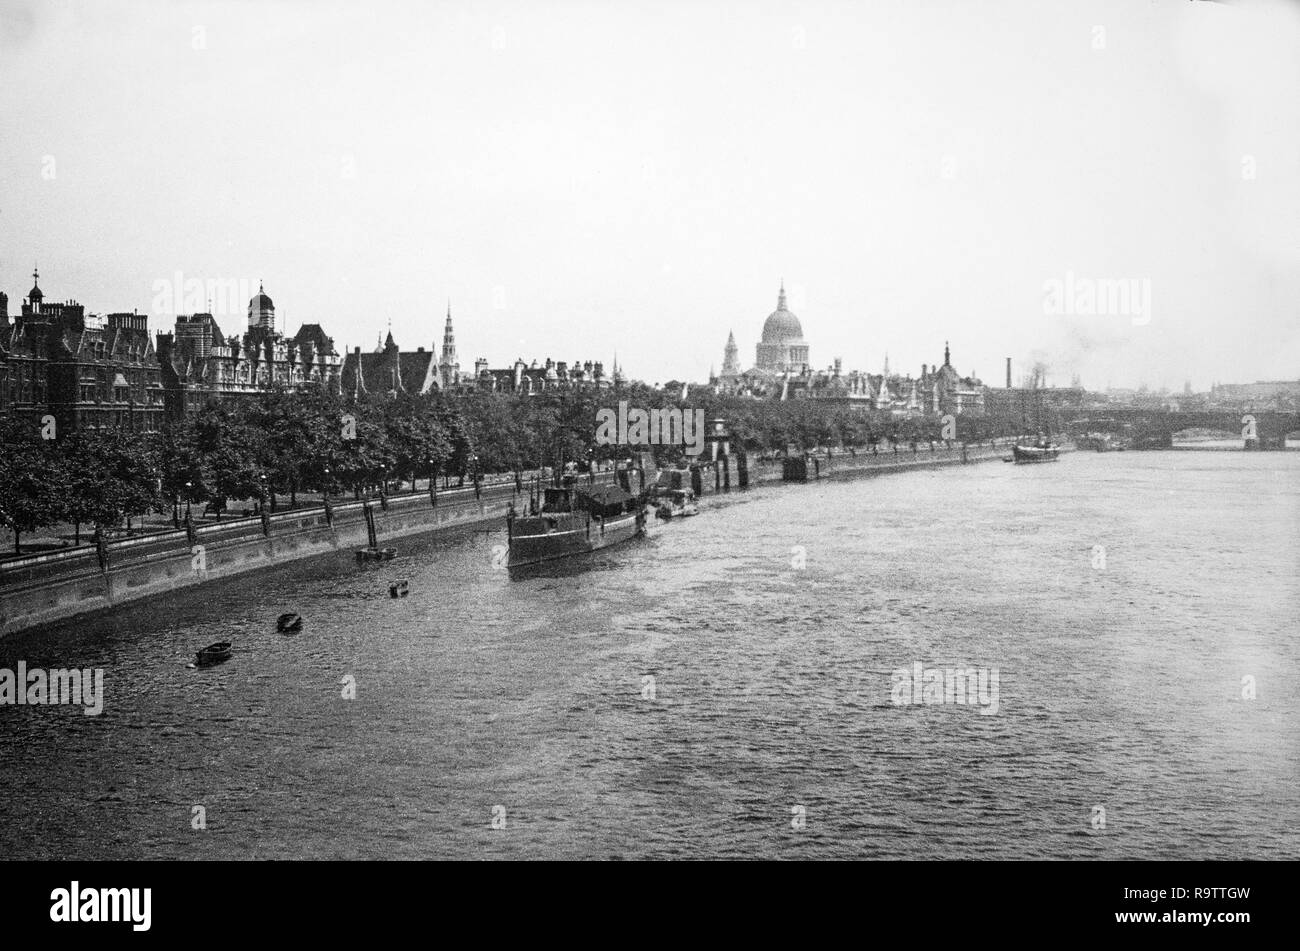 View of the River Thames in London, taken in 1919. View is looking East with Saint Pauls Cathedral visible on the skyline. Stock Photo